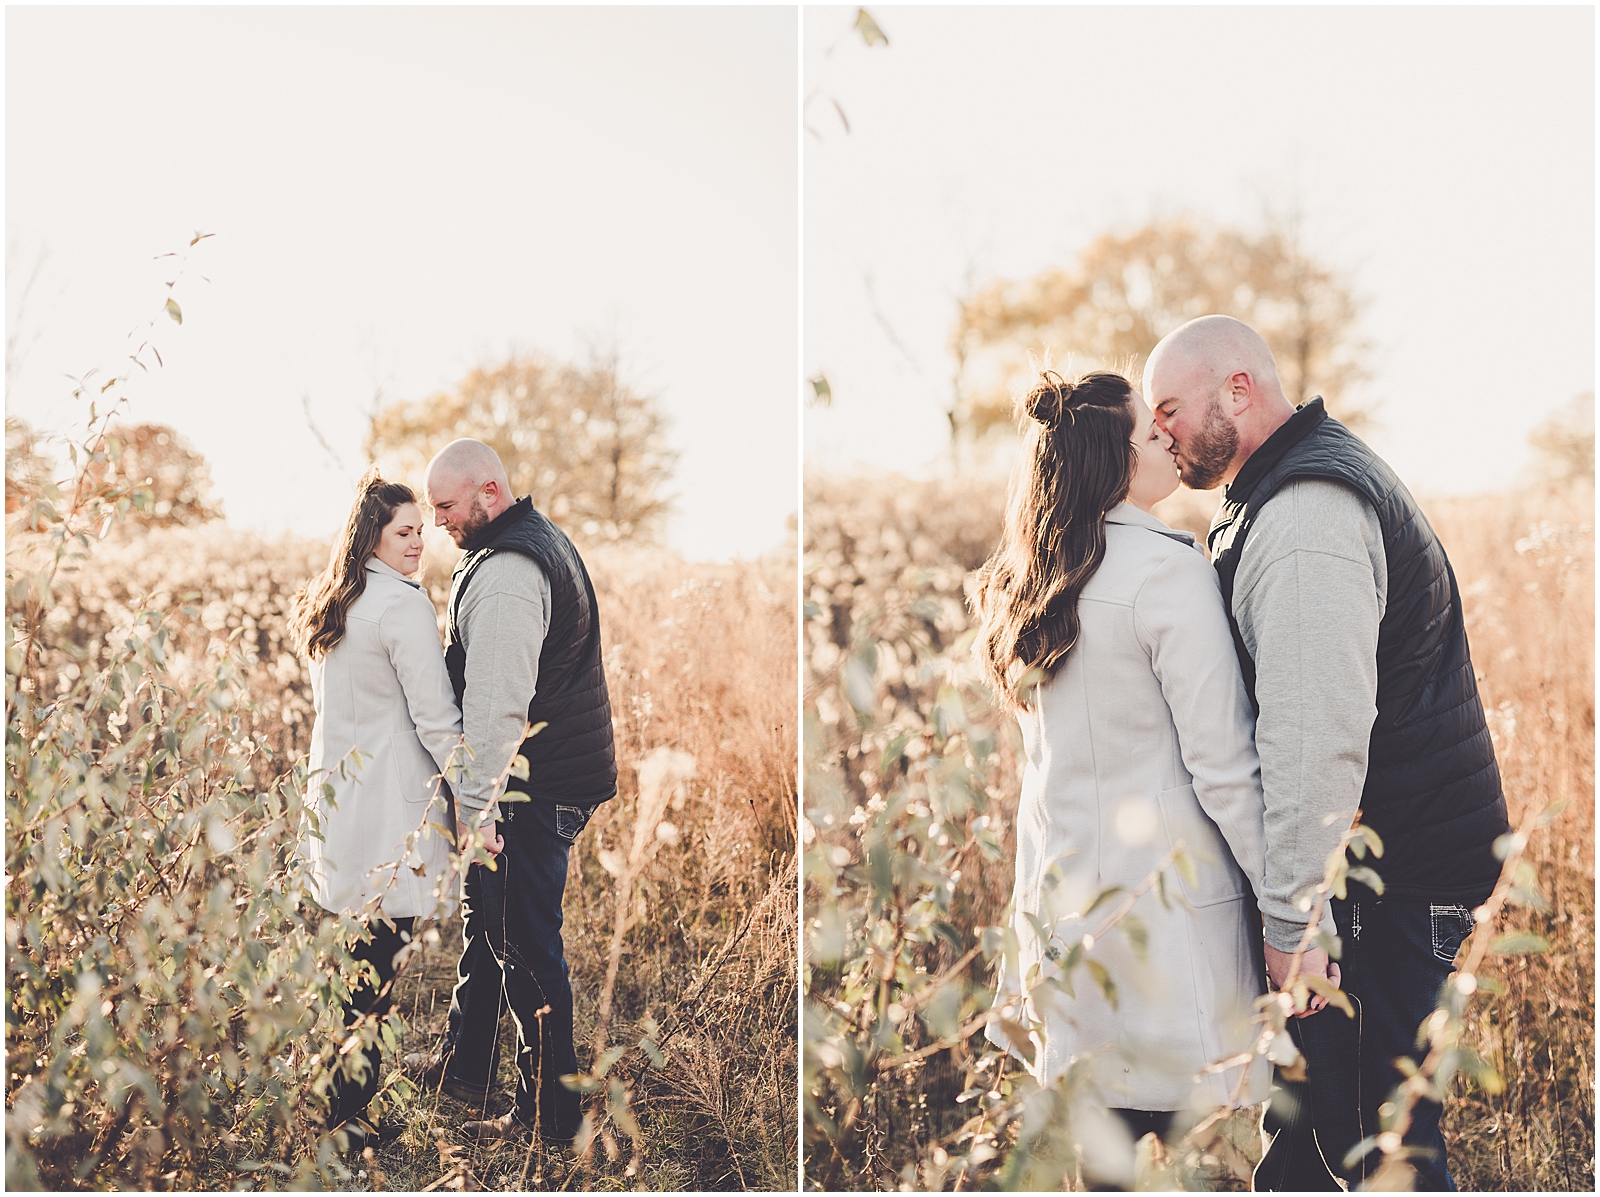 Carol and Casey's fall Perry Farm engagement in Bourbonnais, Illinois with Chicagoland wedding photographer Kara Evans Photographer.